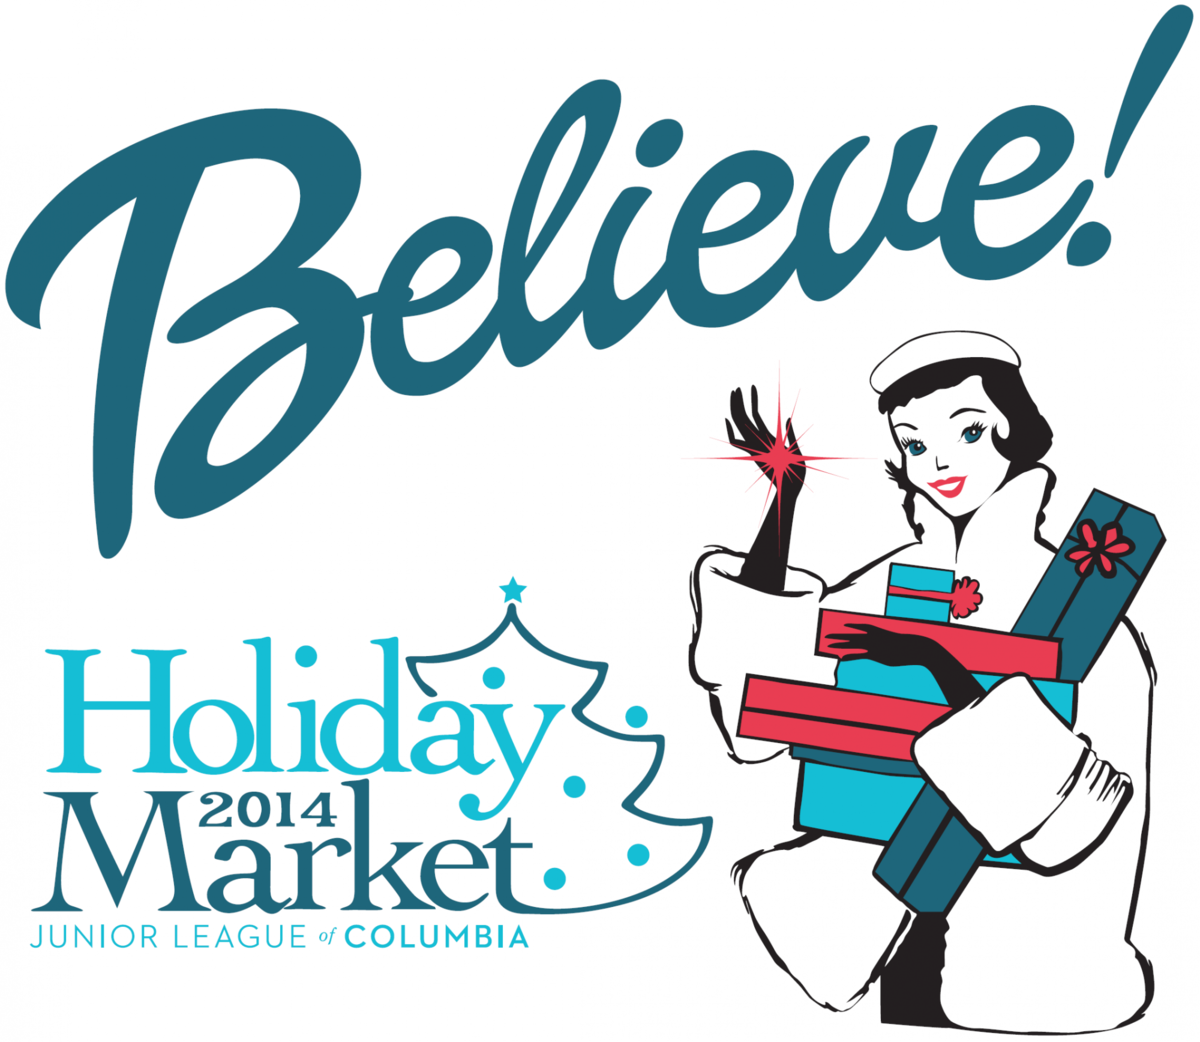 Junior League’s Holiday Market Is A Big Deal.